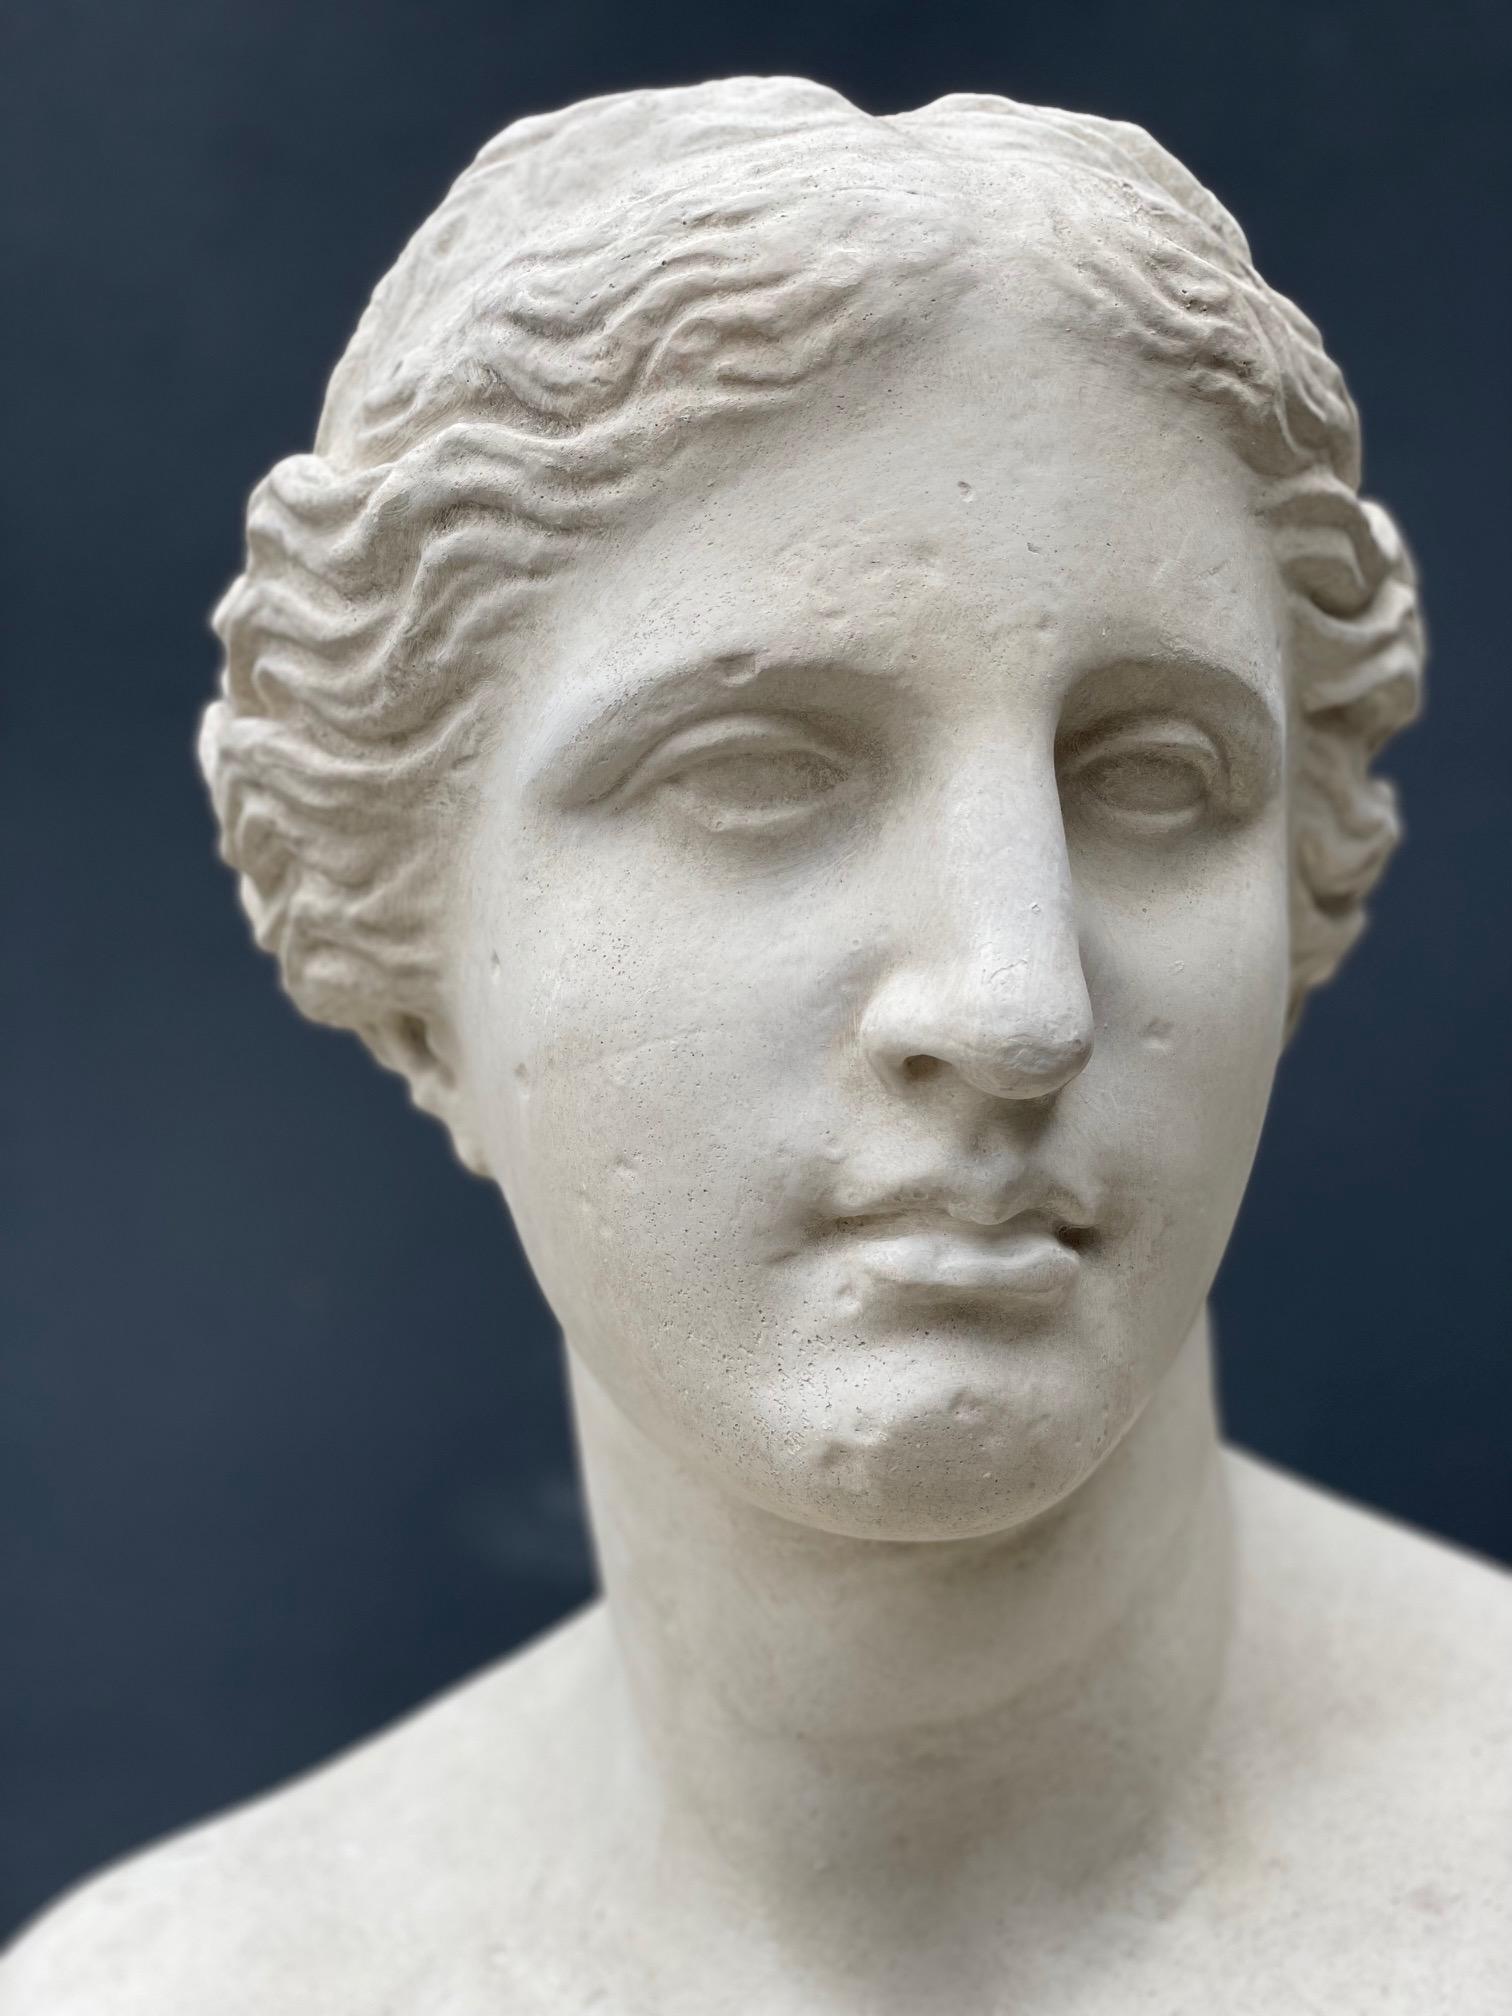 A plaster bust of the goddess Aphrodite Venus.

A great decorative addition to your interior.